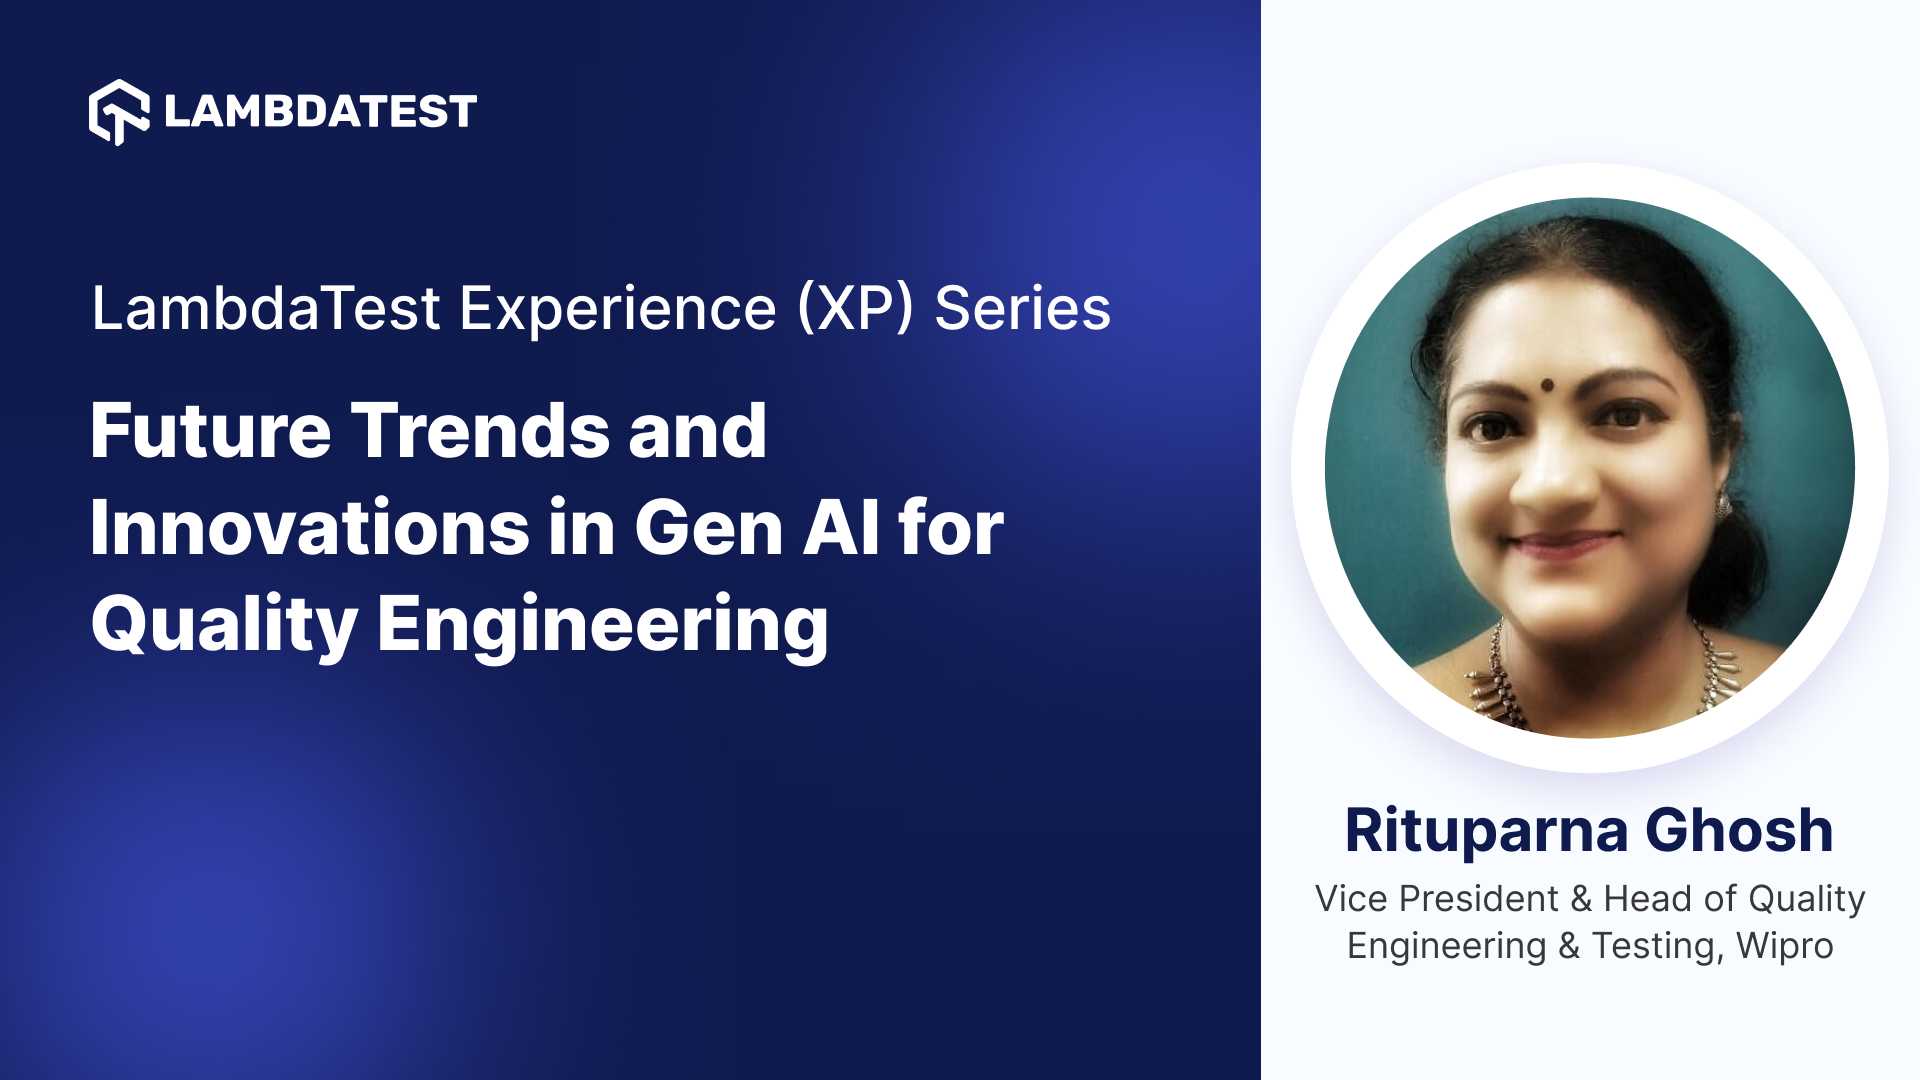 Future Trends and Innovations in Gen AI for Quality Engineering